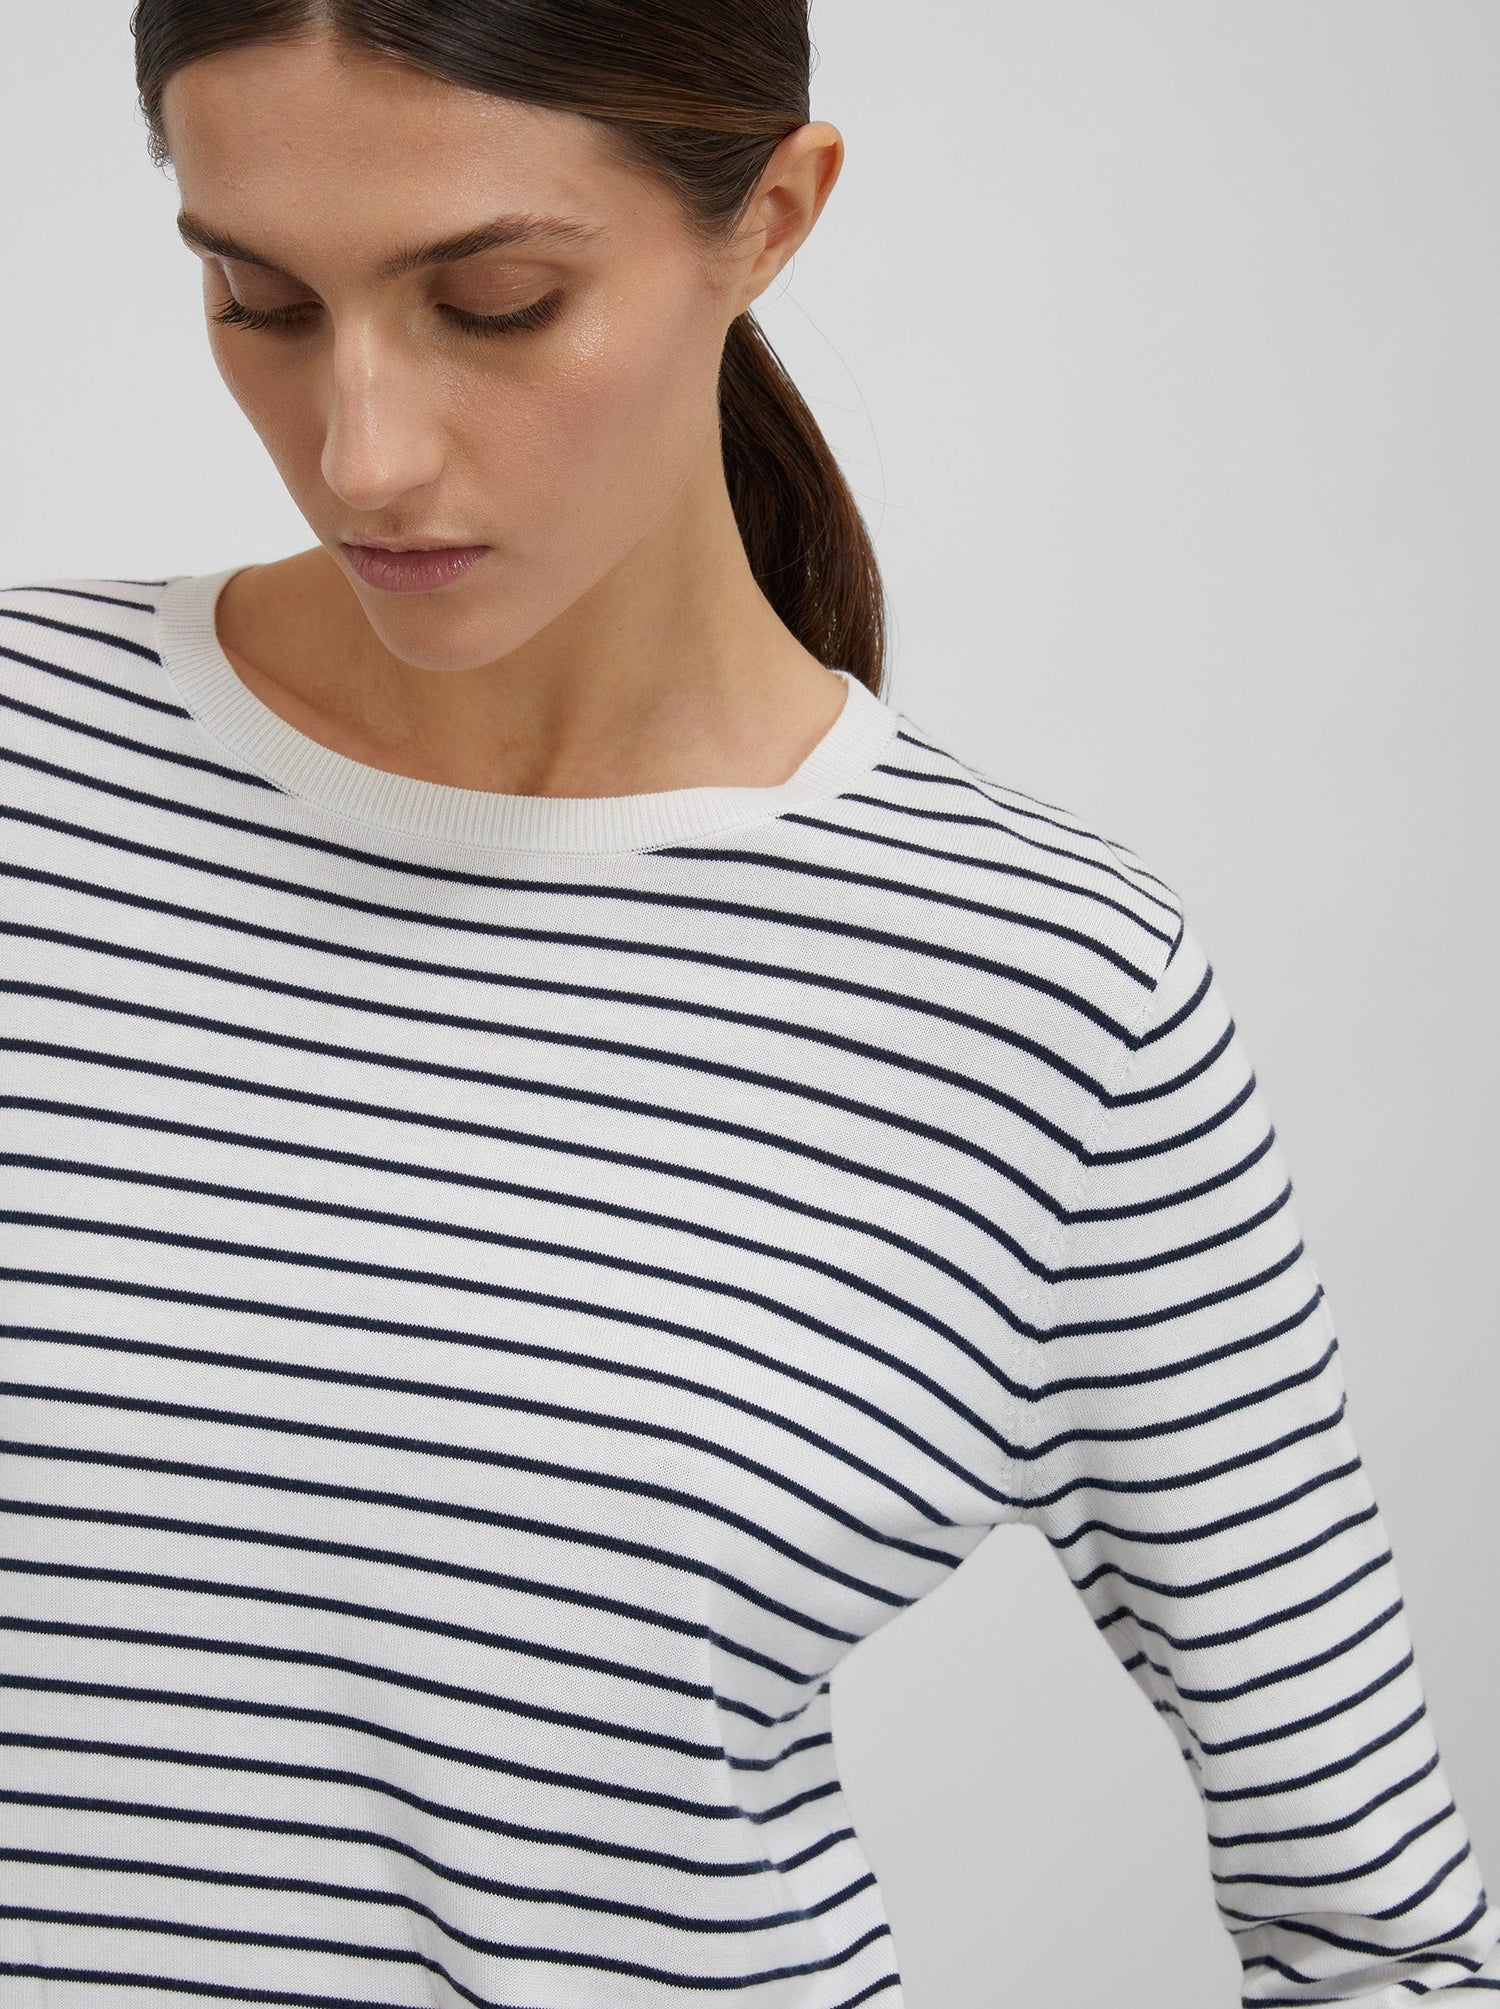 Striped knitted cotton shirt, white/navy